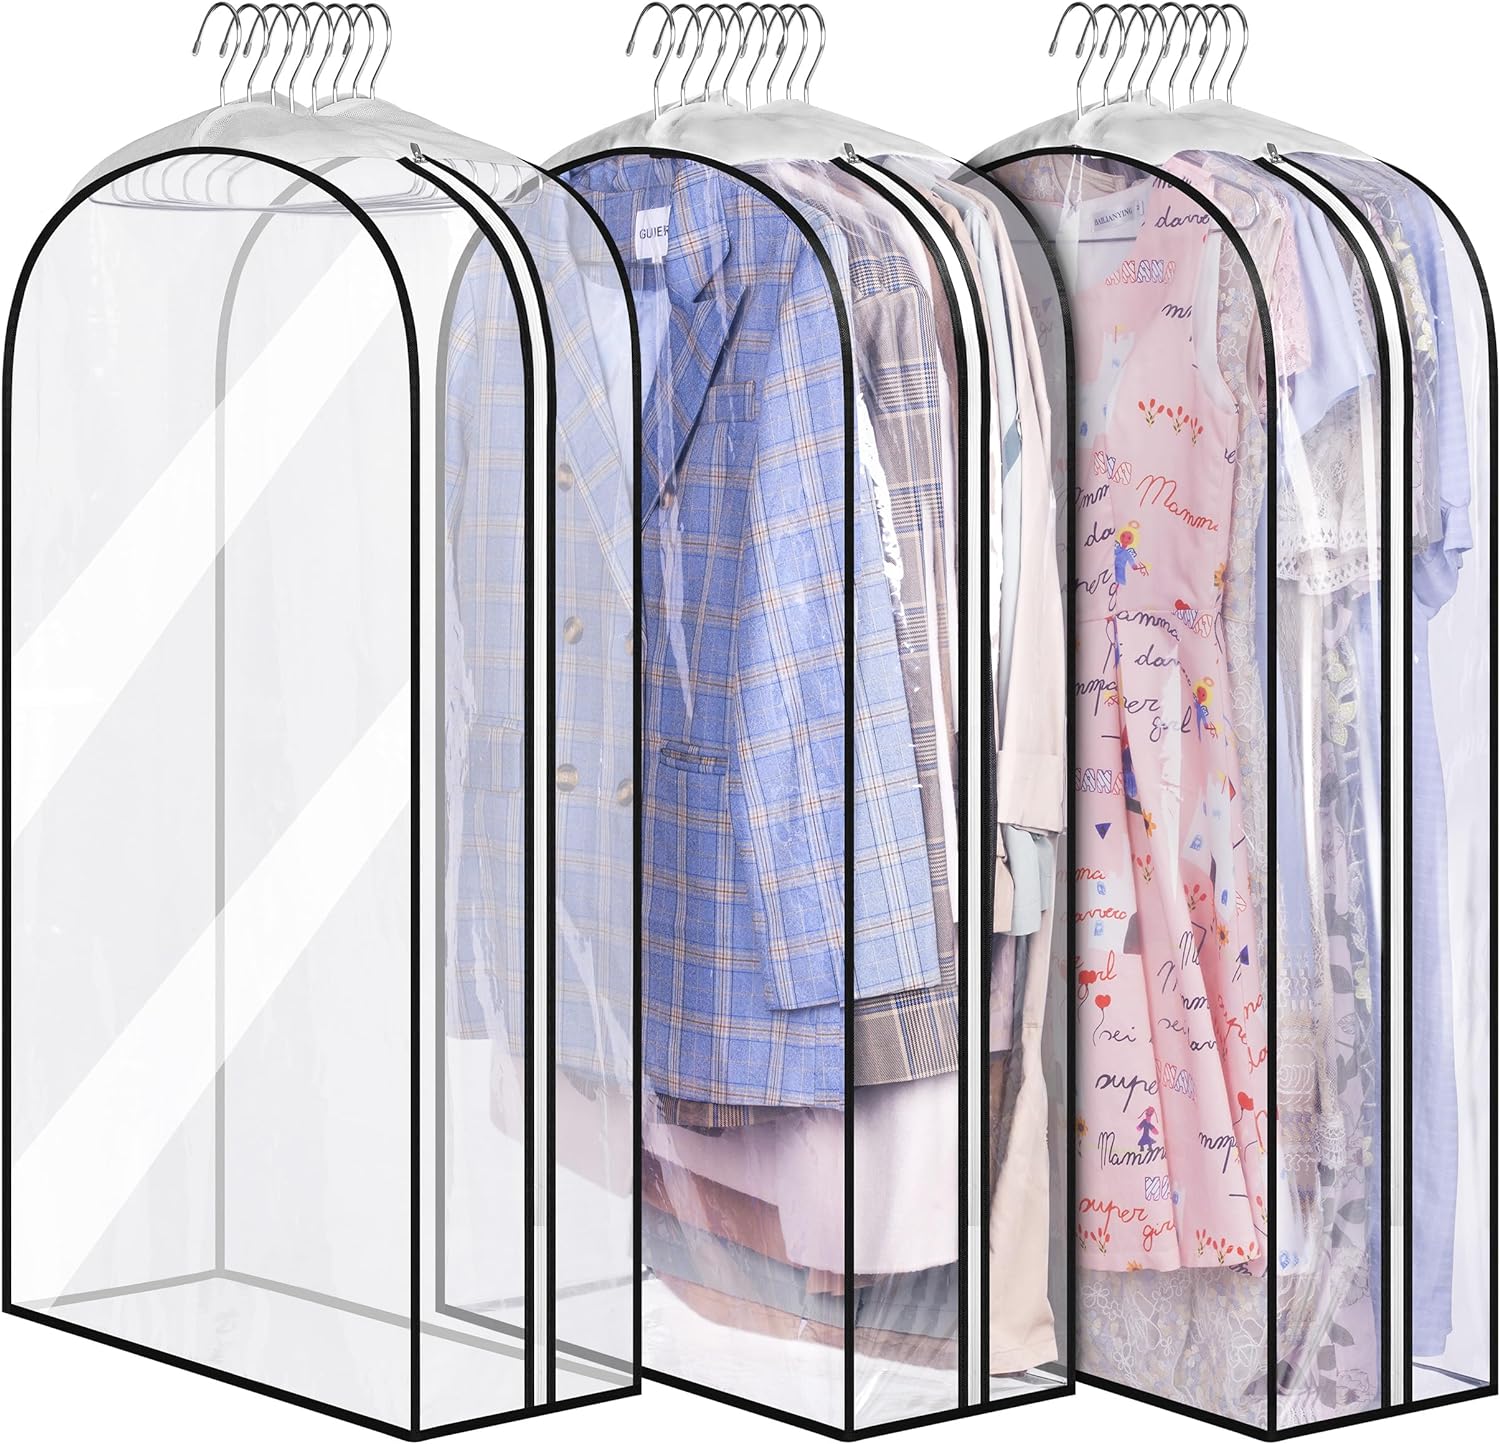 MISSLO 10 Gusseted All Clear Garment Bags, 40 Suit Bags for Closet Storage Hanging Clothes, Shirts, Coats, Dresses, 3 Packs